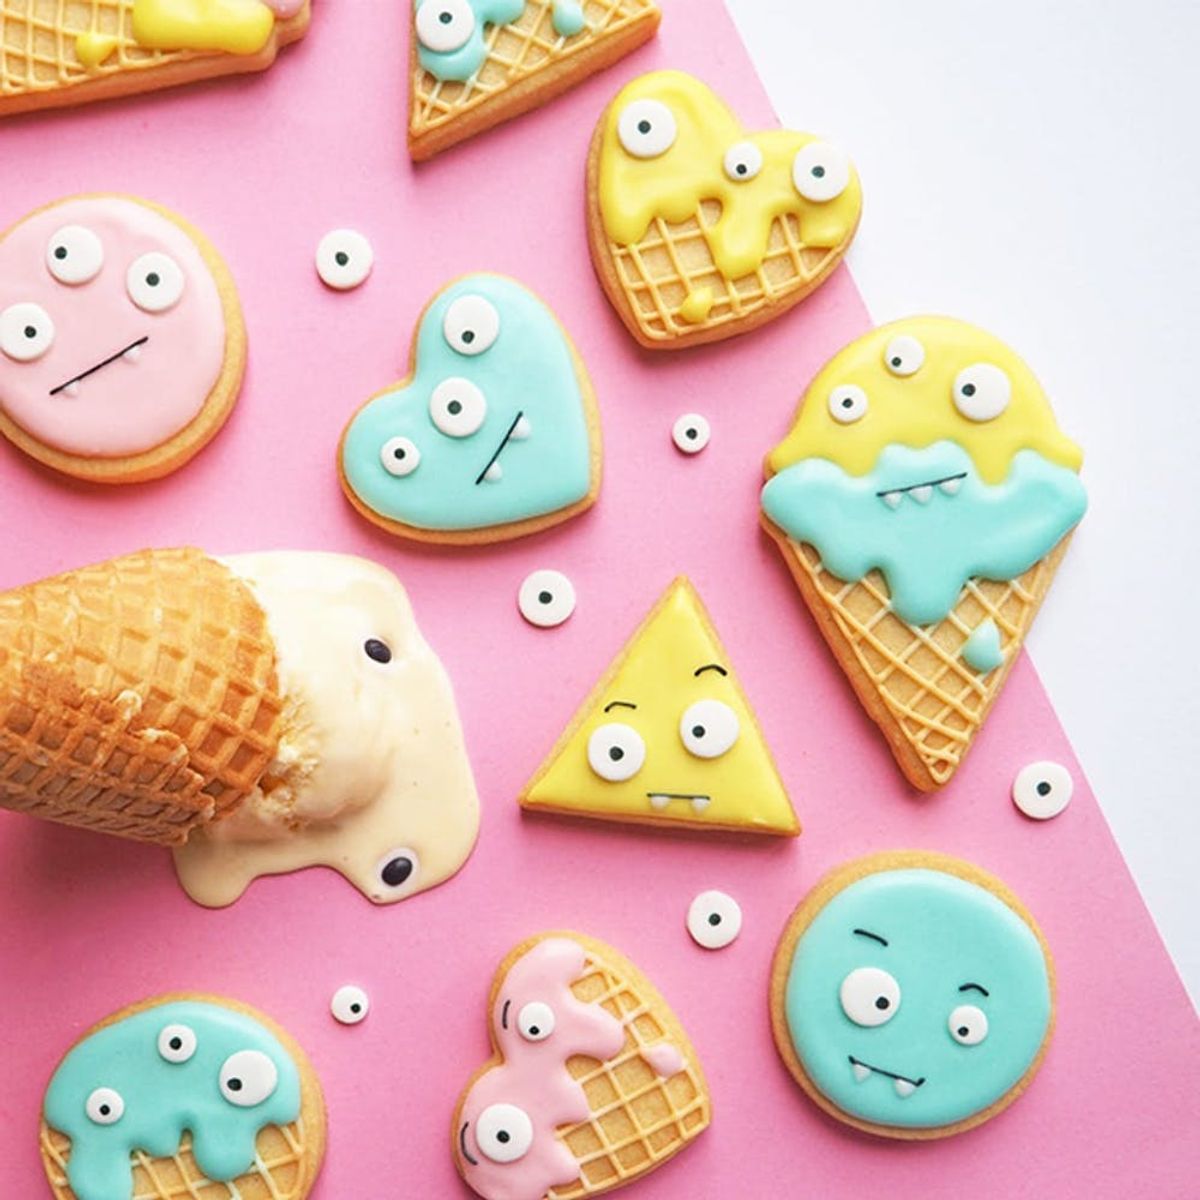 Googly Eye Cookies, Pom-Pom Pumpkins, and More Weekend Craft Projects